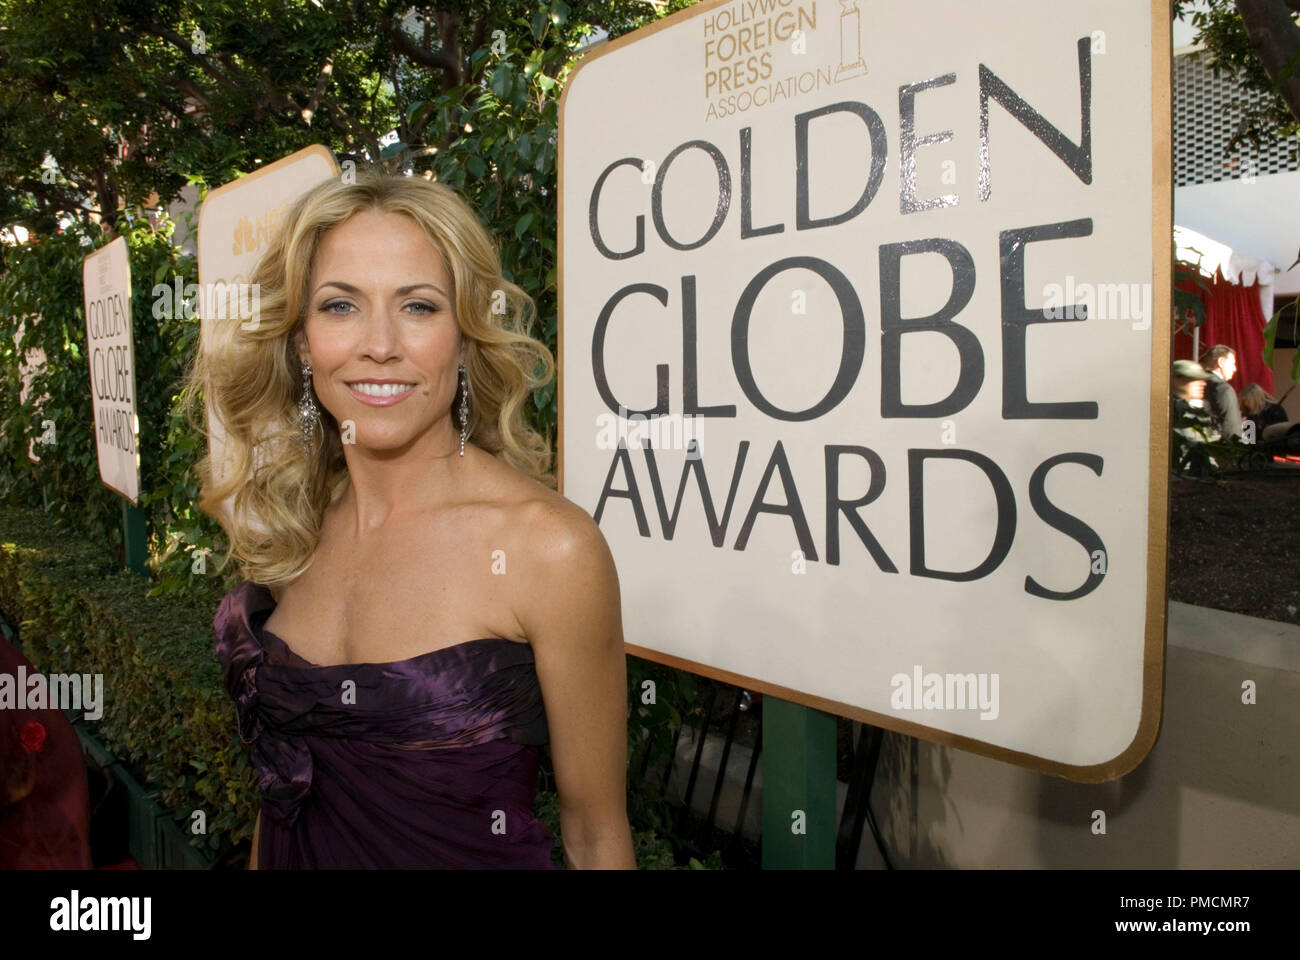 Hollywood Foreign Press Association presents the 2007 'Golden Globe Awards - 64th Annual' (Arrivals) Sheryl Crow 1-15-07 Stock Photo